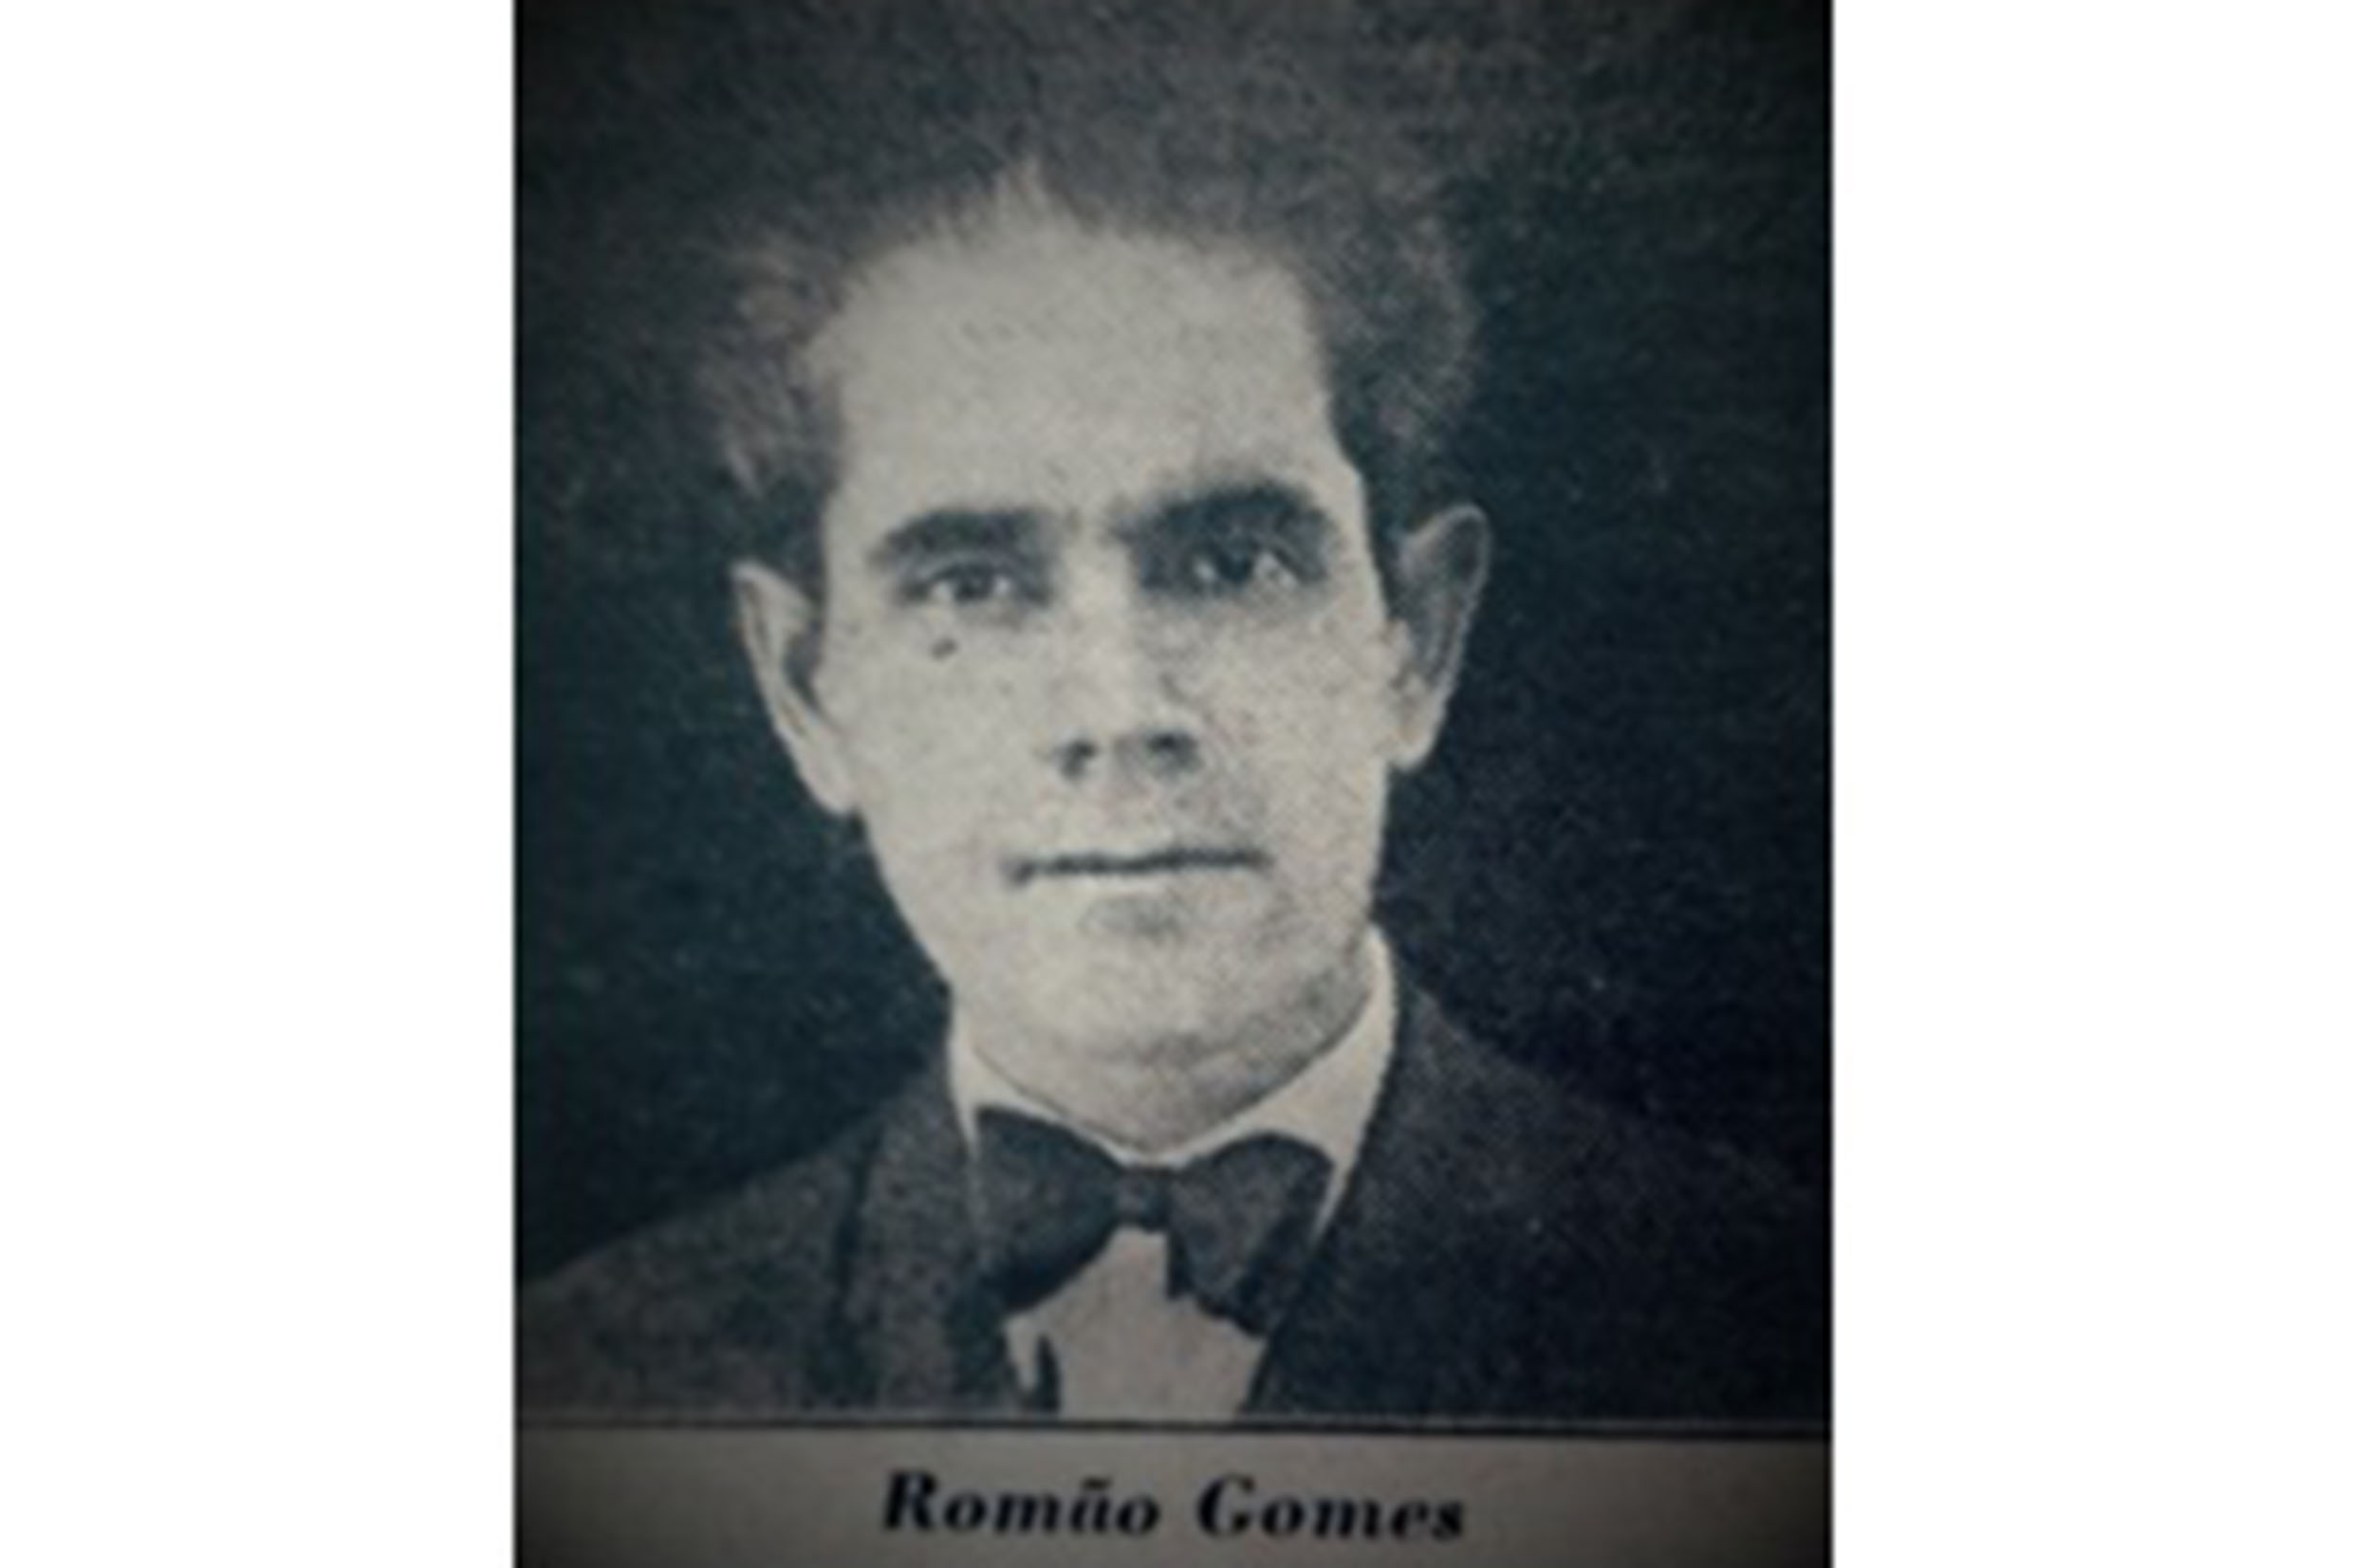 Romo Gomes<a style='float:right' href='https://www3.al.sp.gov.br/repositorio/noticia/N-07-2020/fg251021.jpg' target=_blank><img src='/_img/material-file-download-white.png' width='14px' alt='Clique para baixar a imagem'></a>